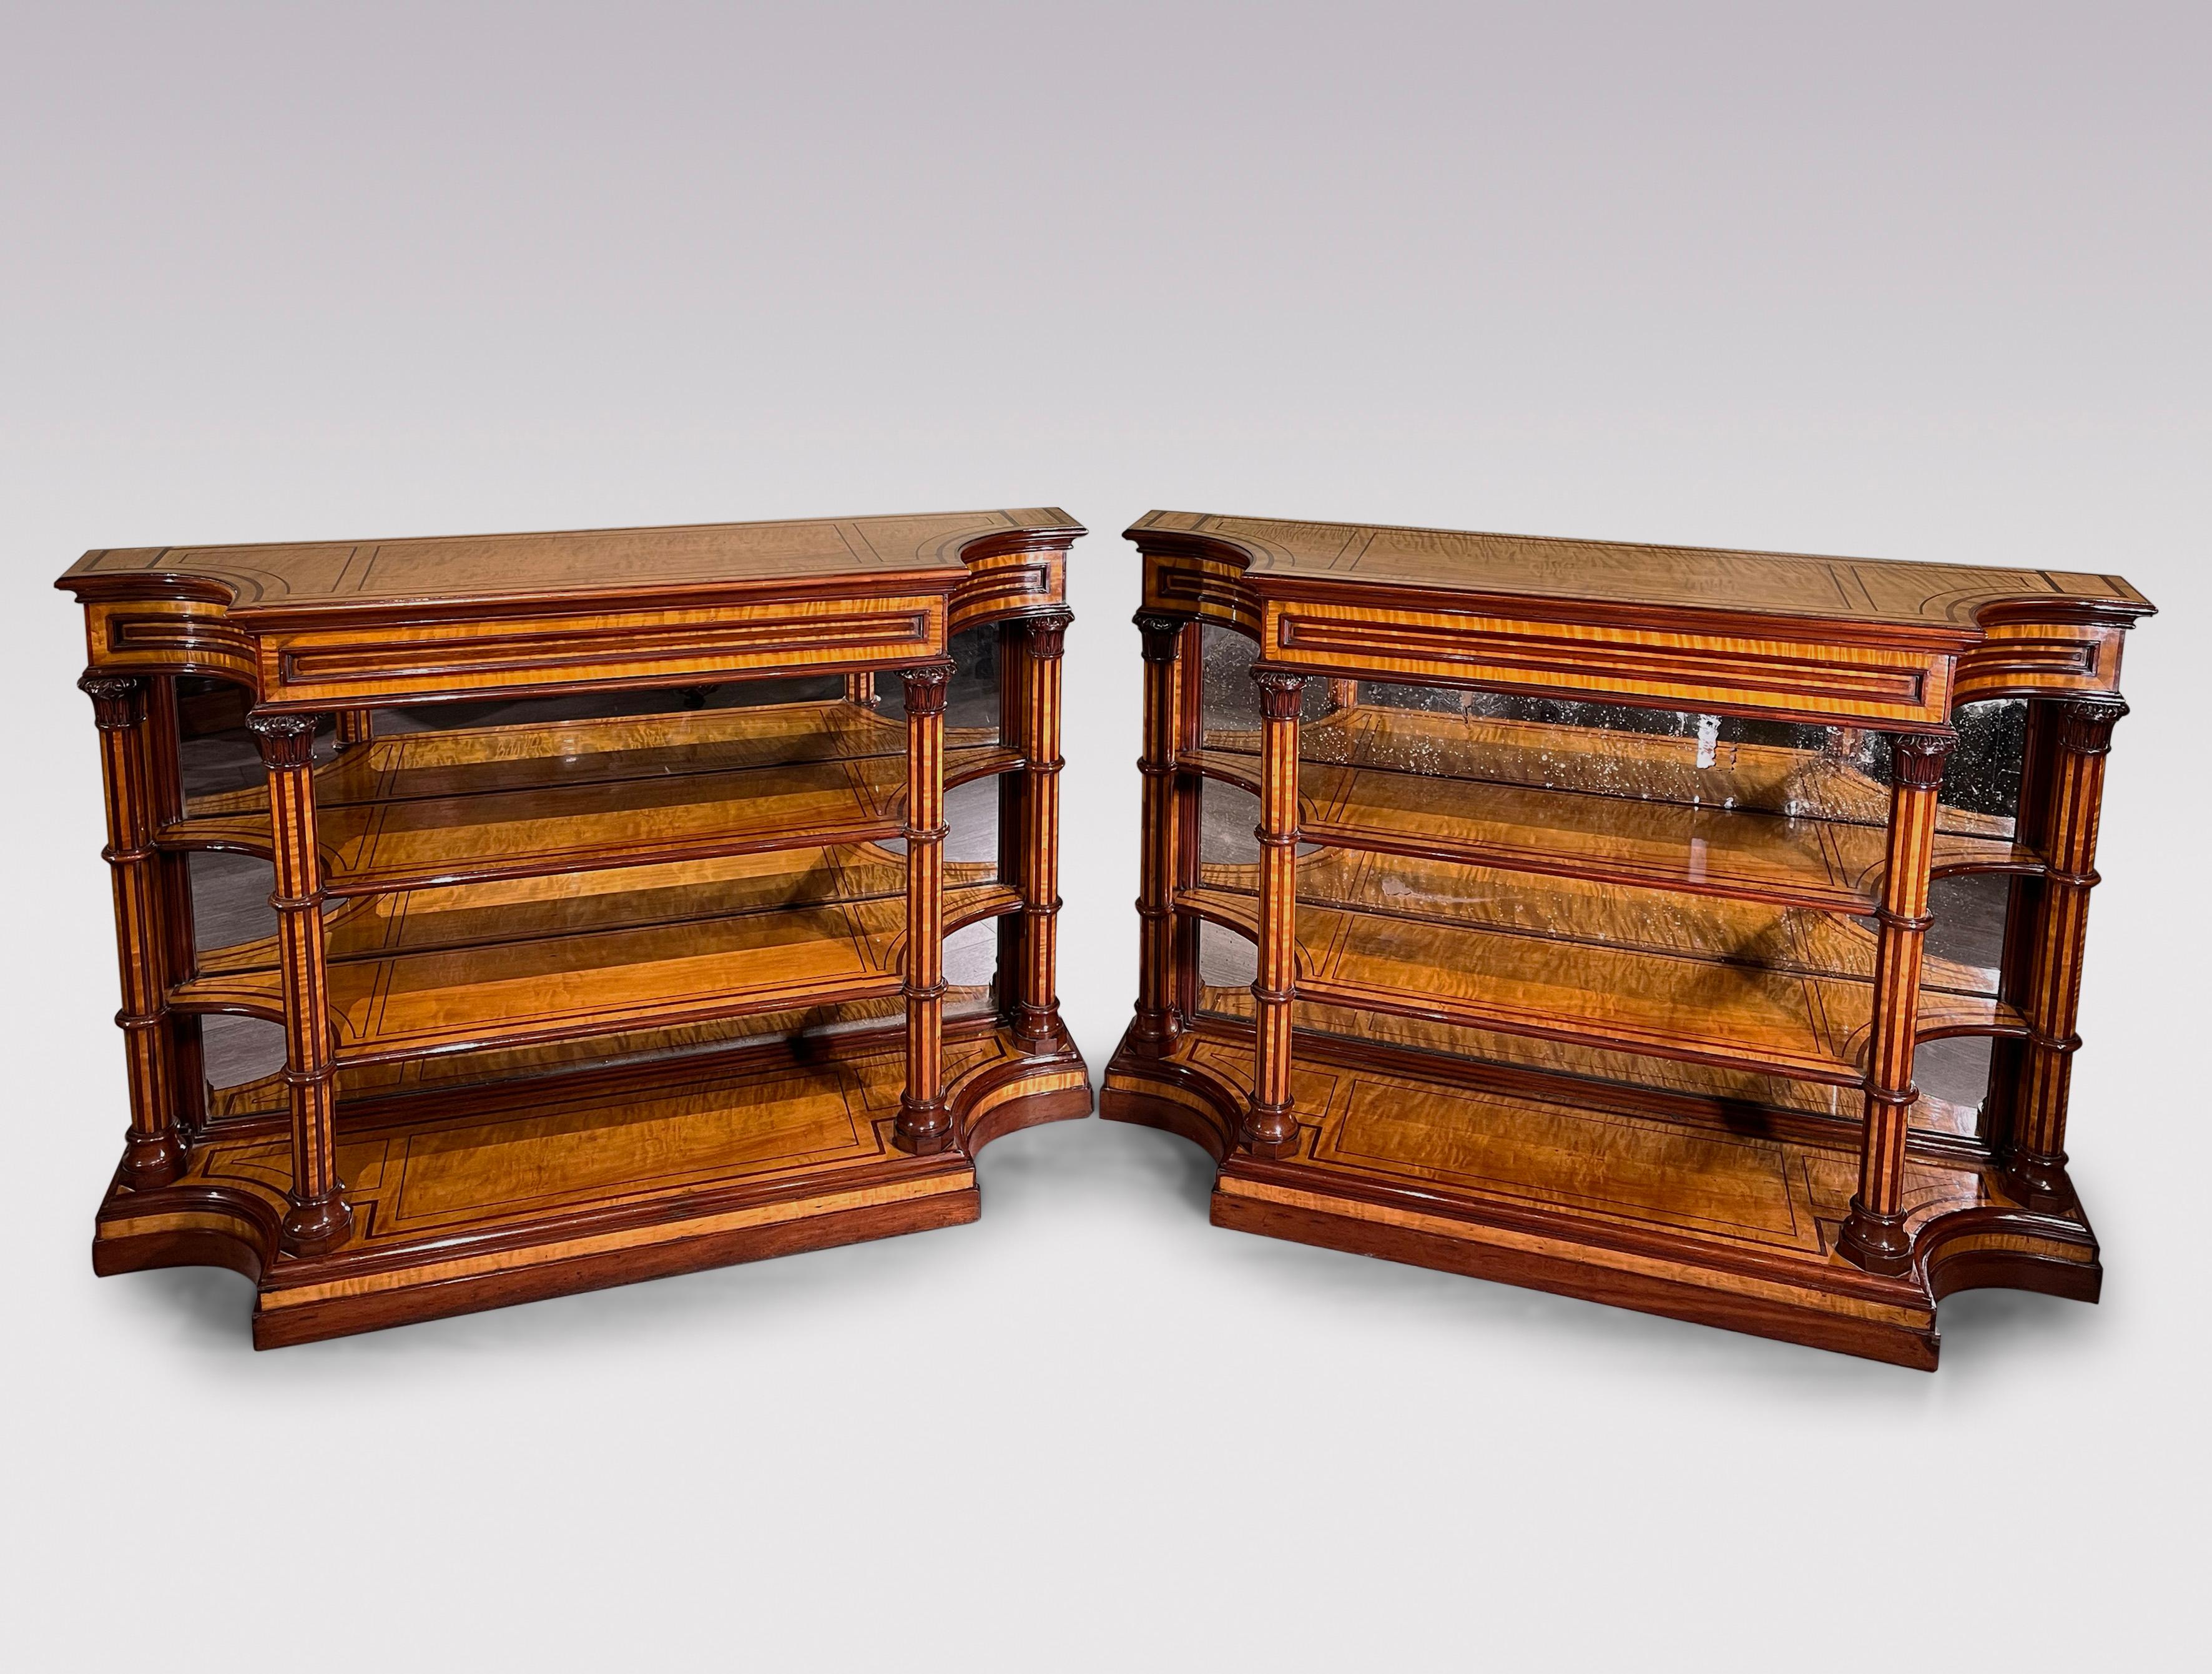 A fine and rare pair of early 19th Century Charles X period Satinwood open Bookshelves Purpleheart wood inlaid and banded throughout with Mahogany moulded edges. The Bookshelves, with concave corners and mirrored backs supported on turned and square